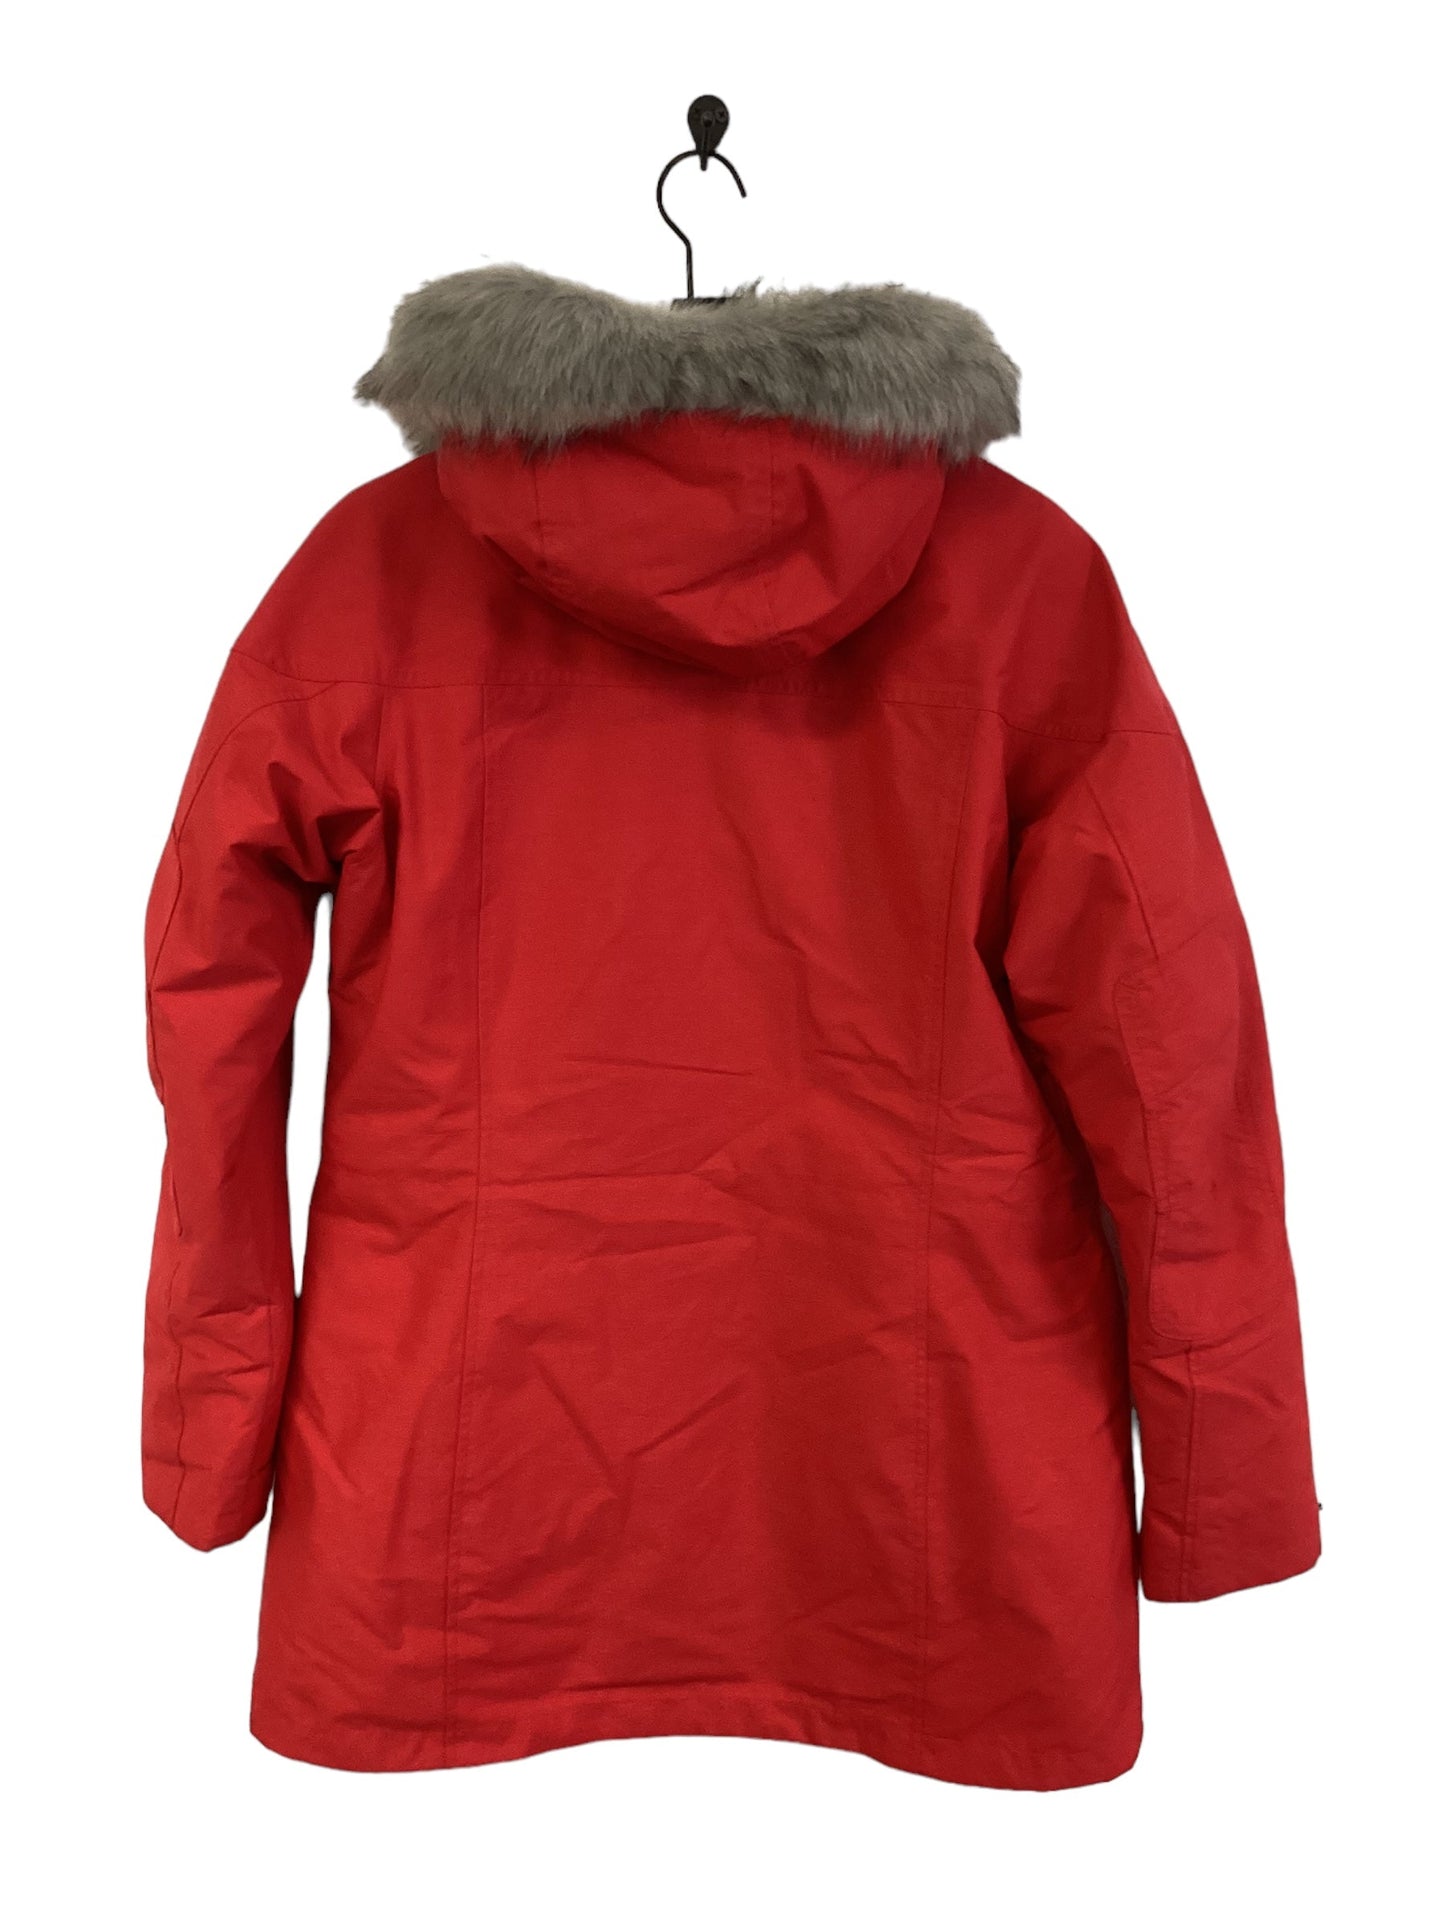 Coat Parka By Columbia  Size: L